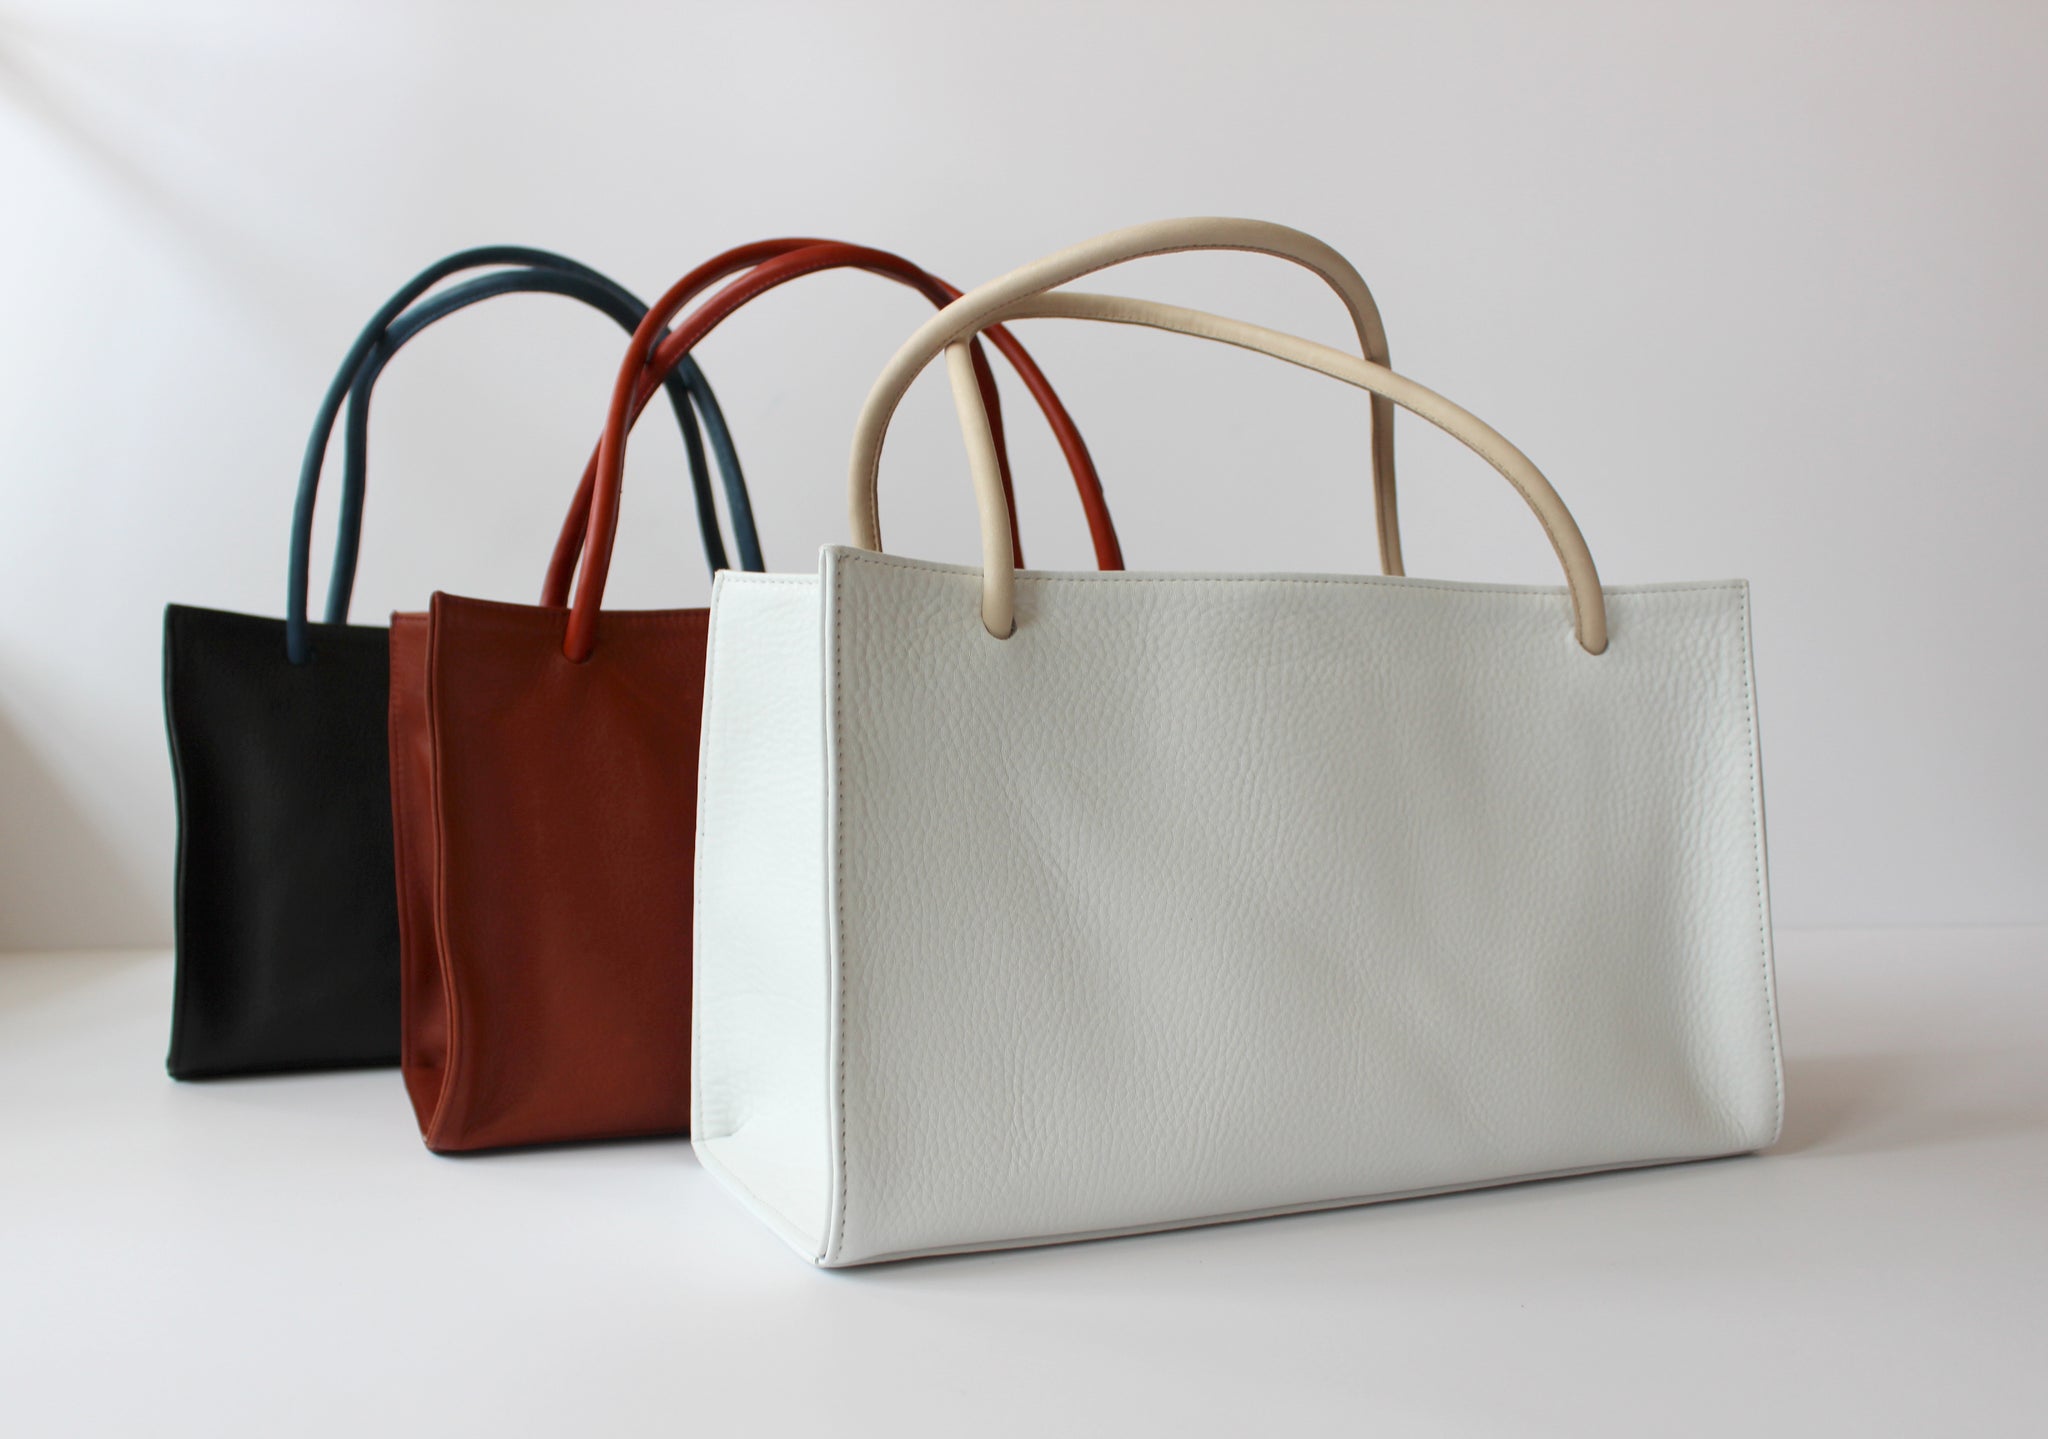 Myers Collective Porter Tote pebbled glovetan leather with contrasting leather straps and interior pockets sized for your sunnies, phone and pens.